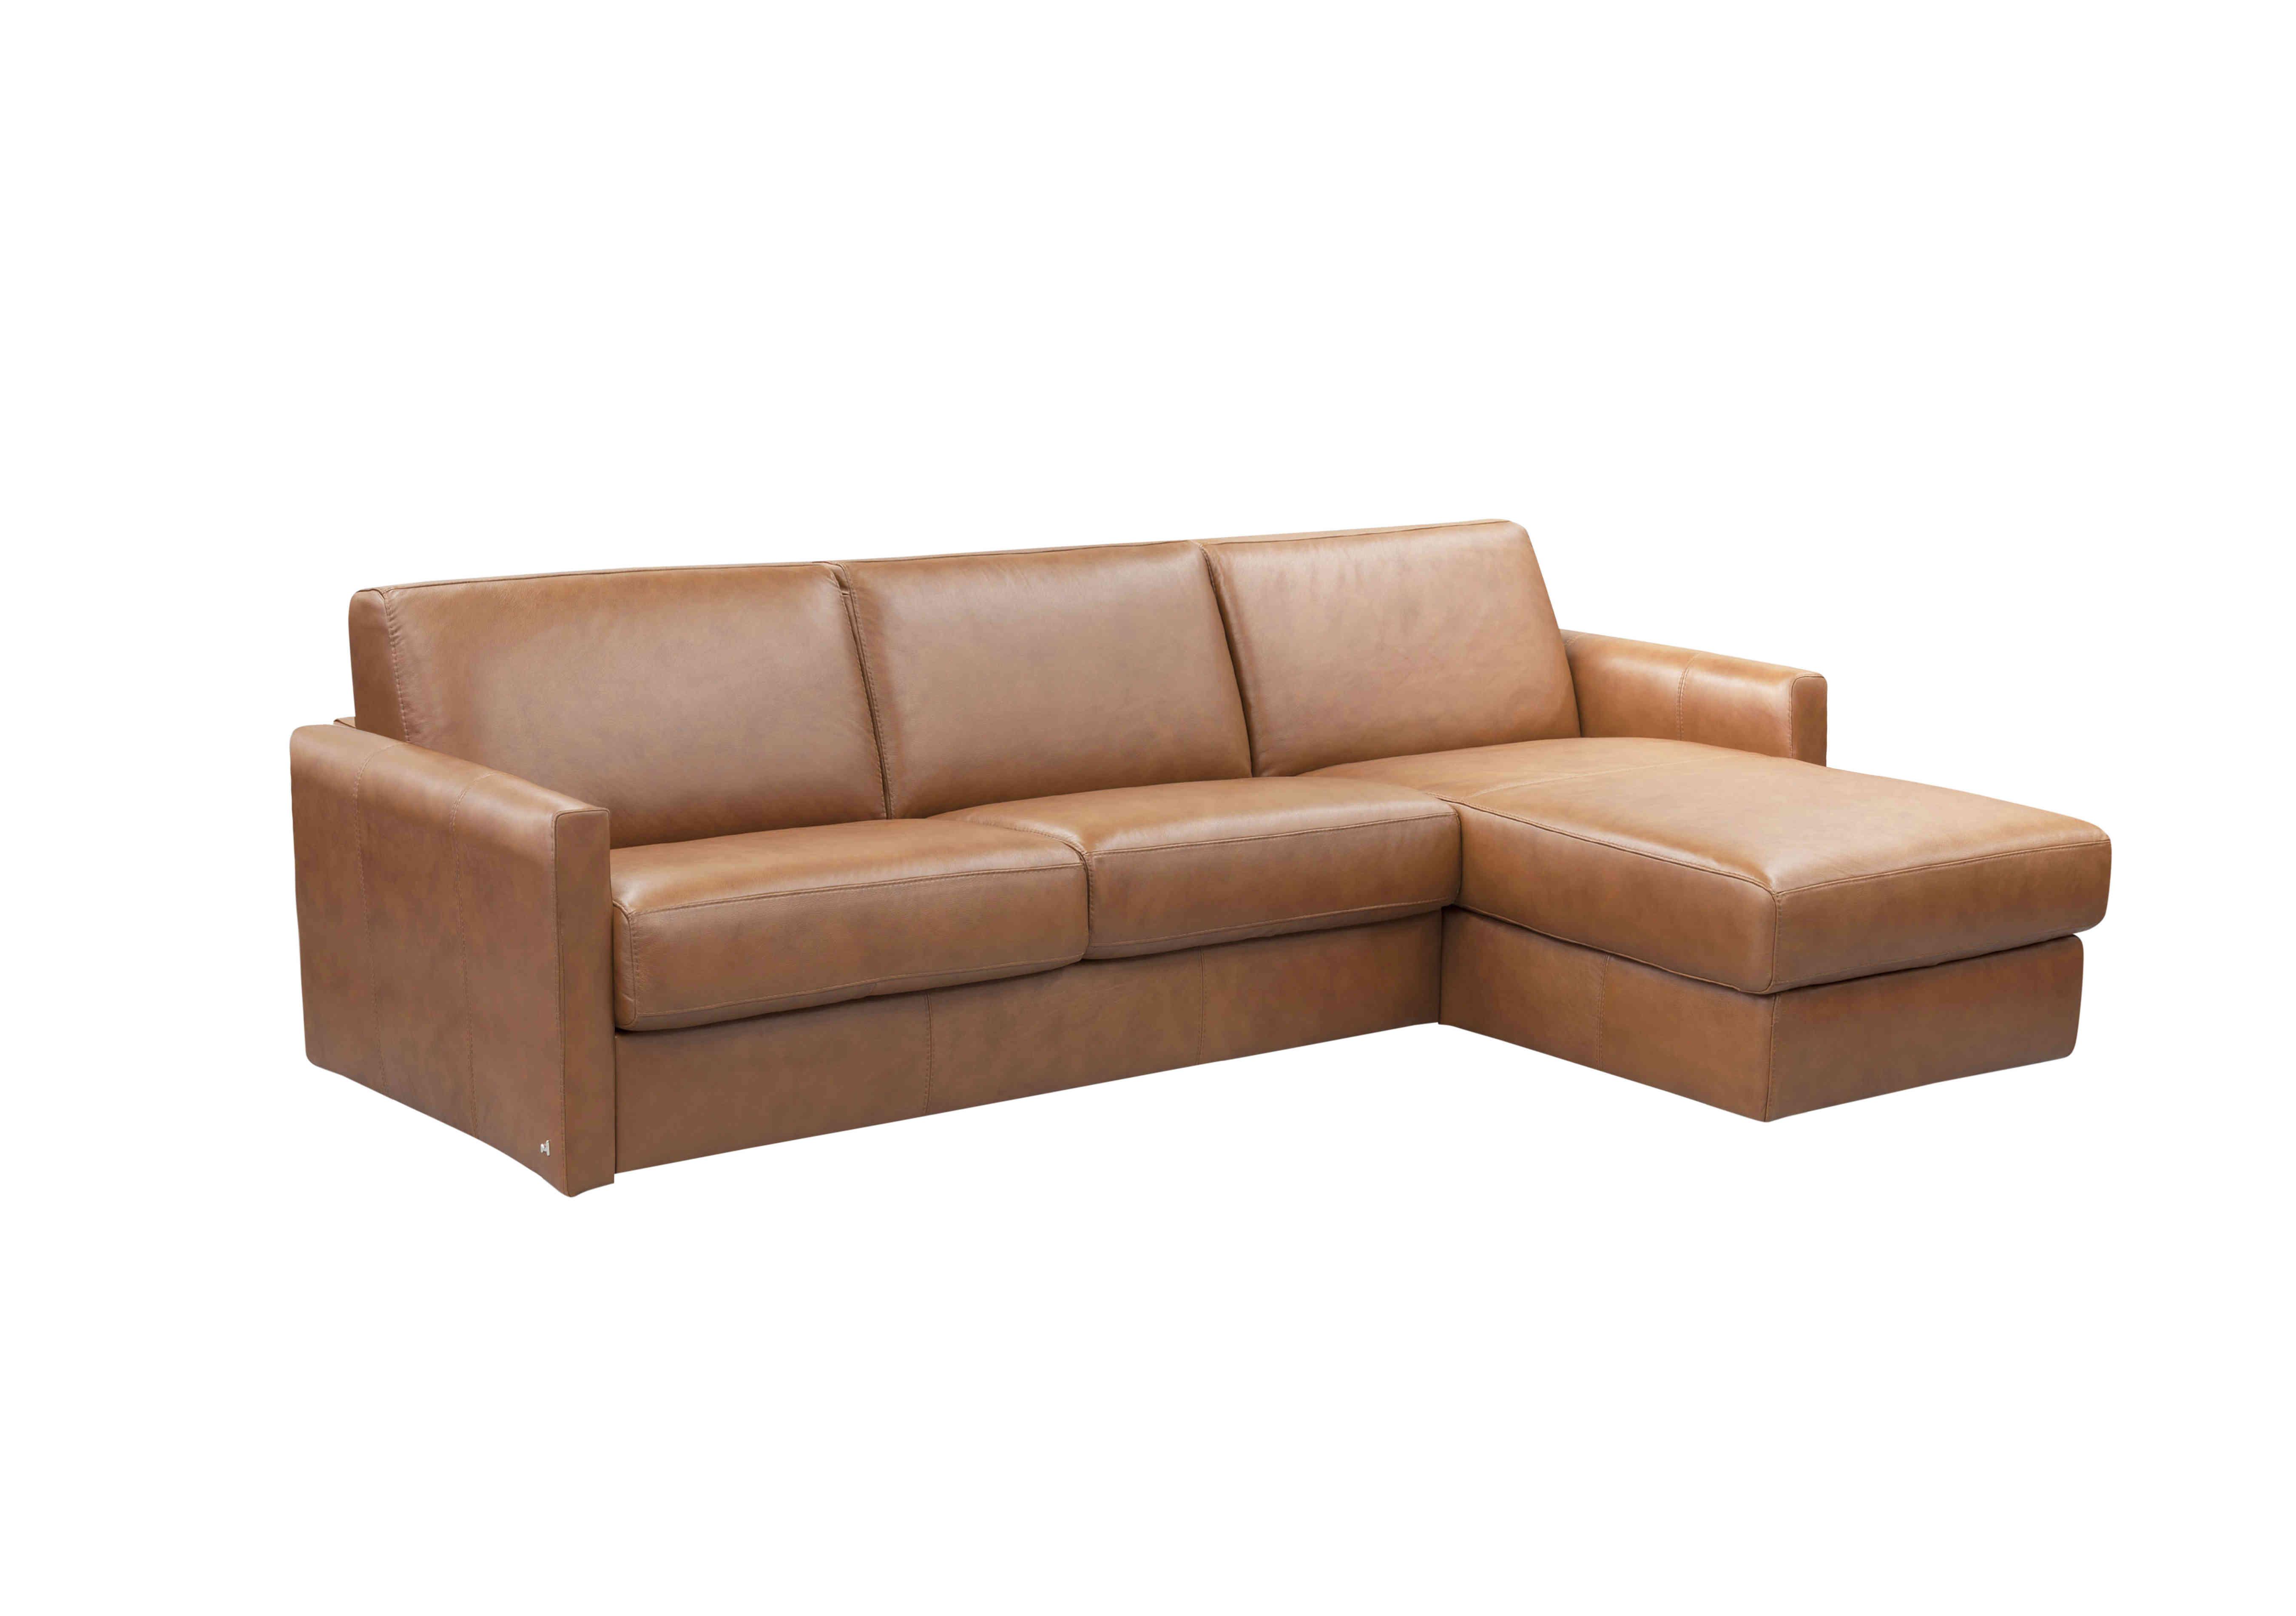 Alcova 3 Seater Leather Sofa Bed with Storage Chaise and Slim Arms in Botero Cuoio 2151 on Furniture Village